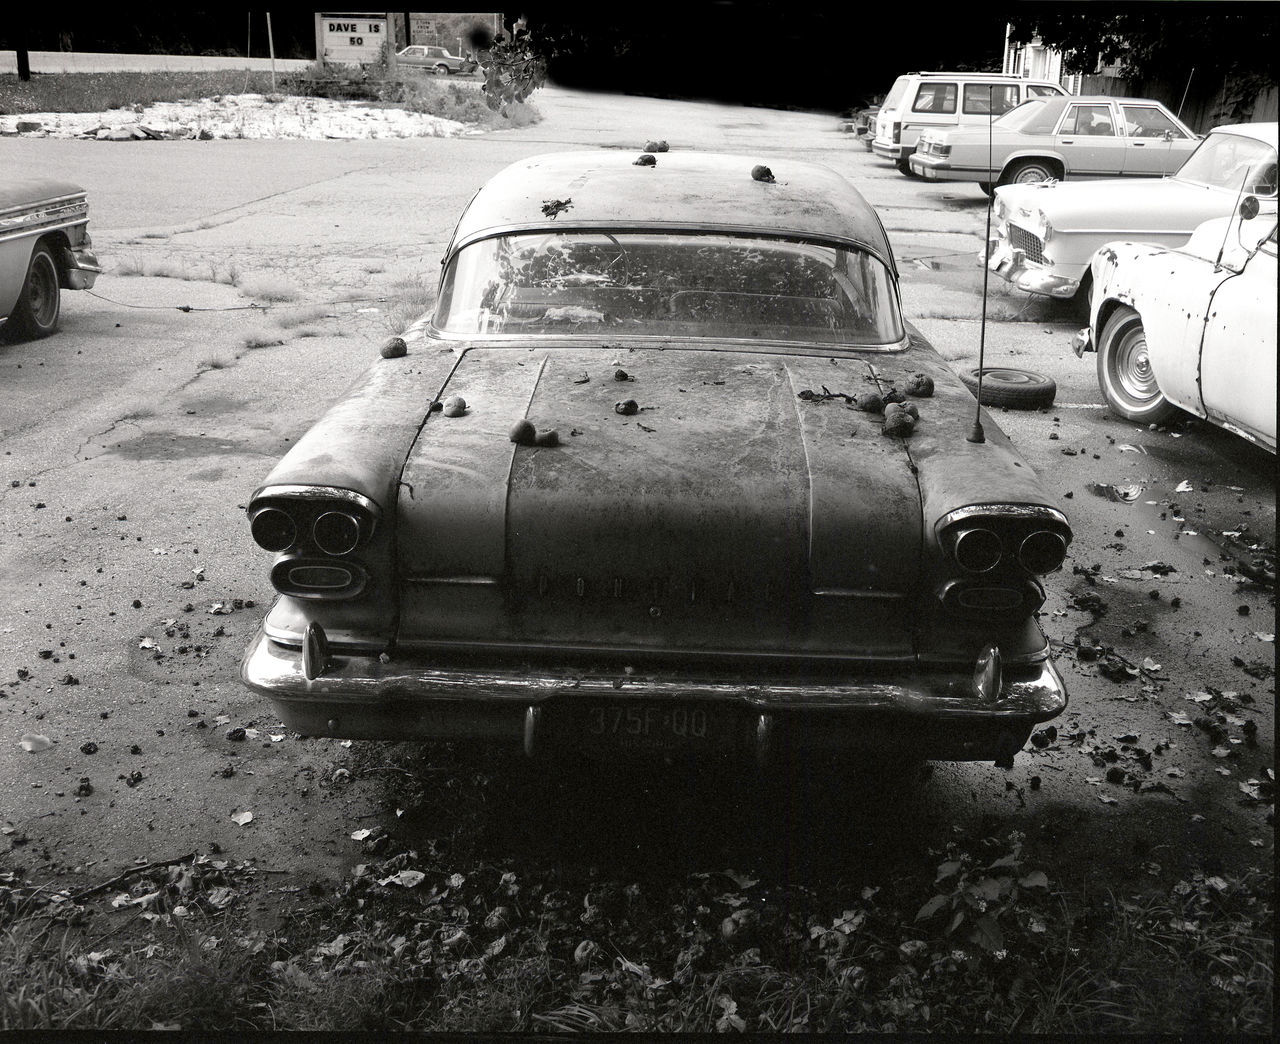 CLOSE-UP OF ABANDONED CAR ON ROAD